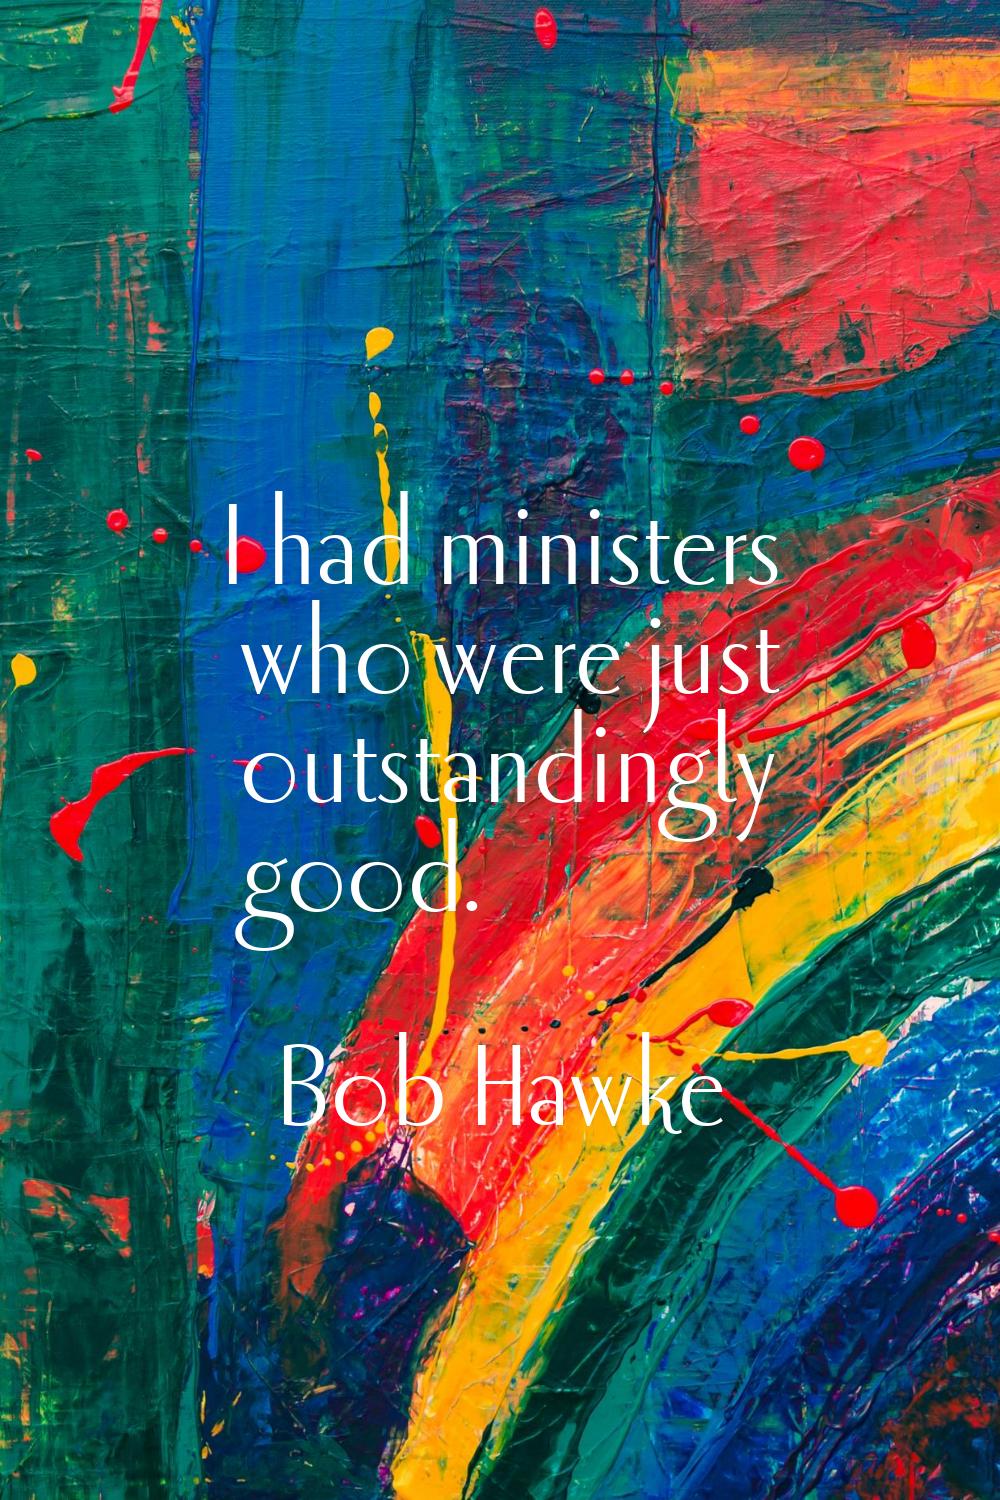 I had ministers who were just outstandingly good.